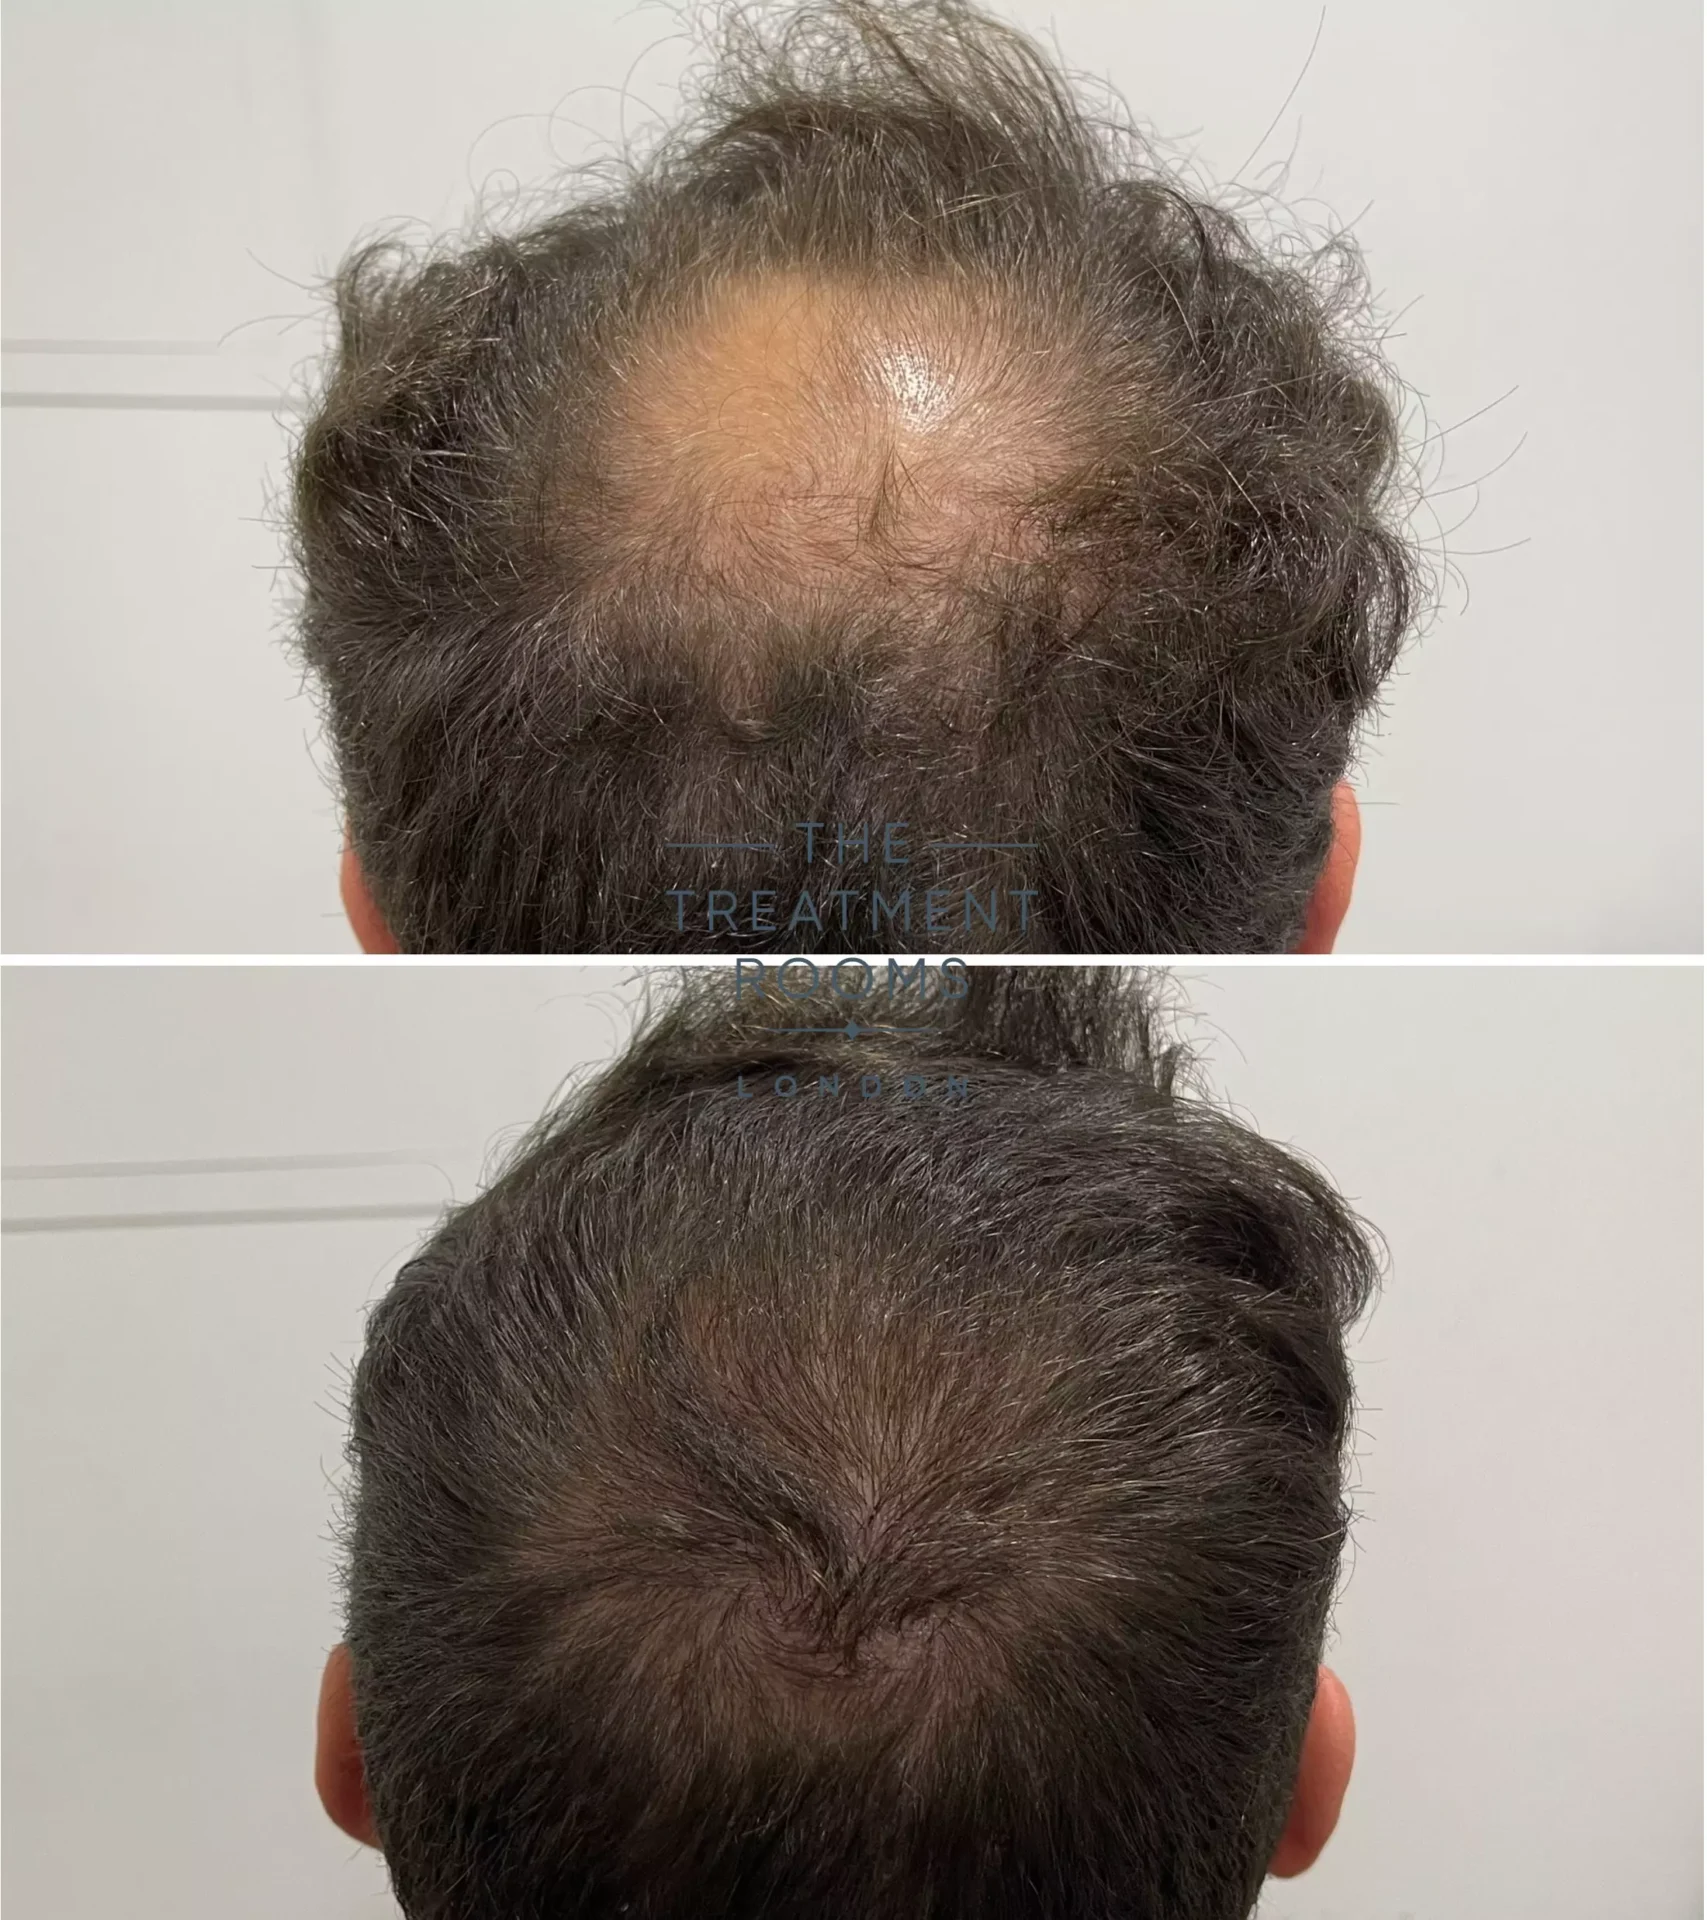 crown hair transplant before and after